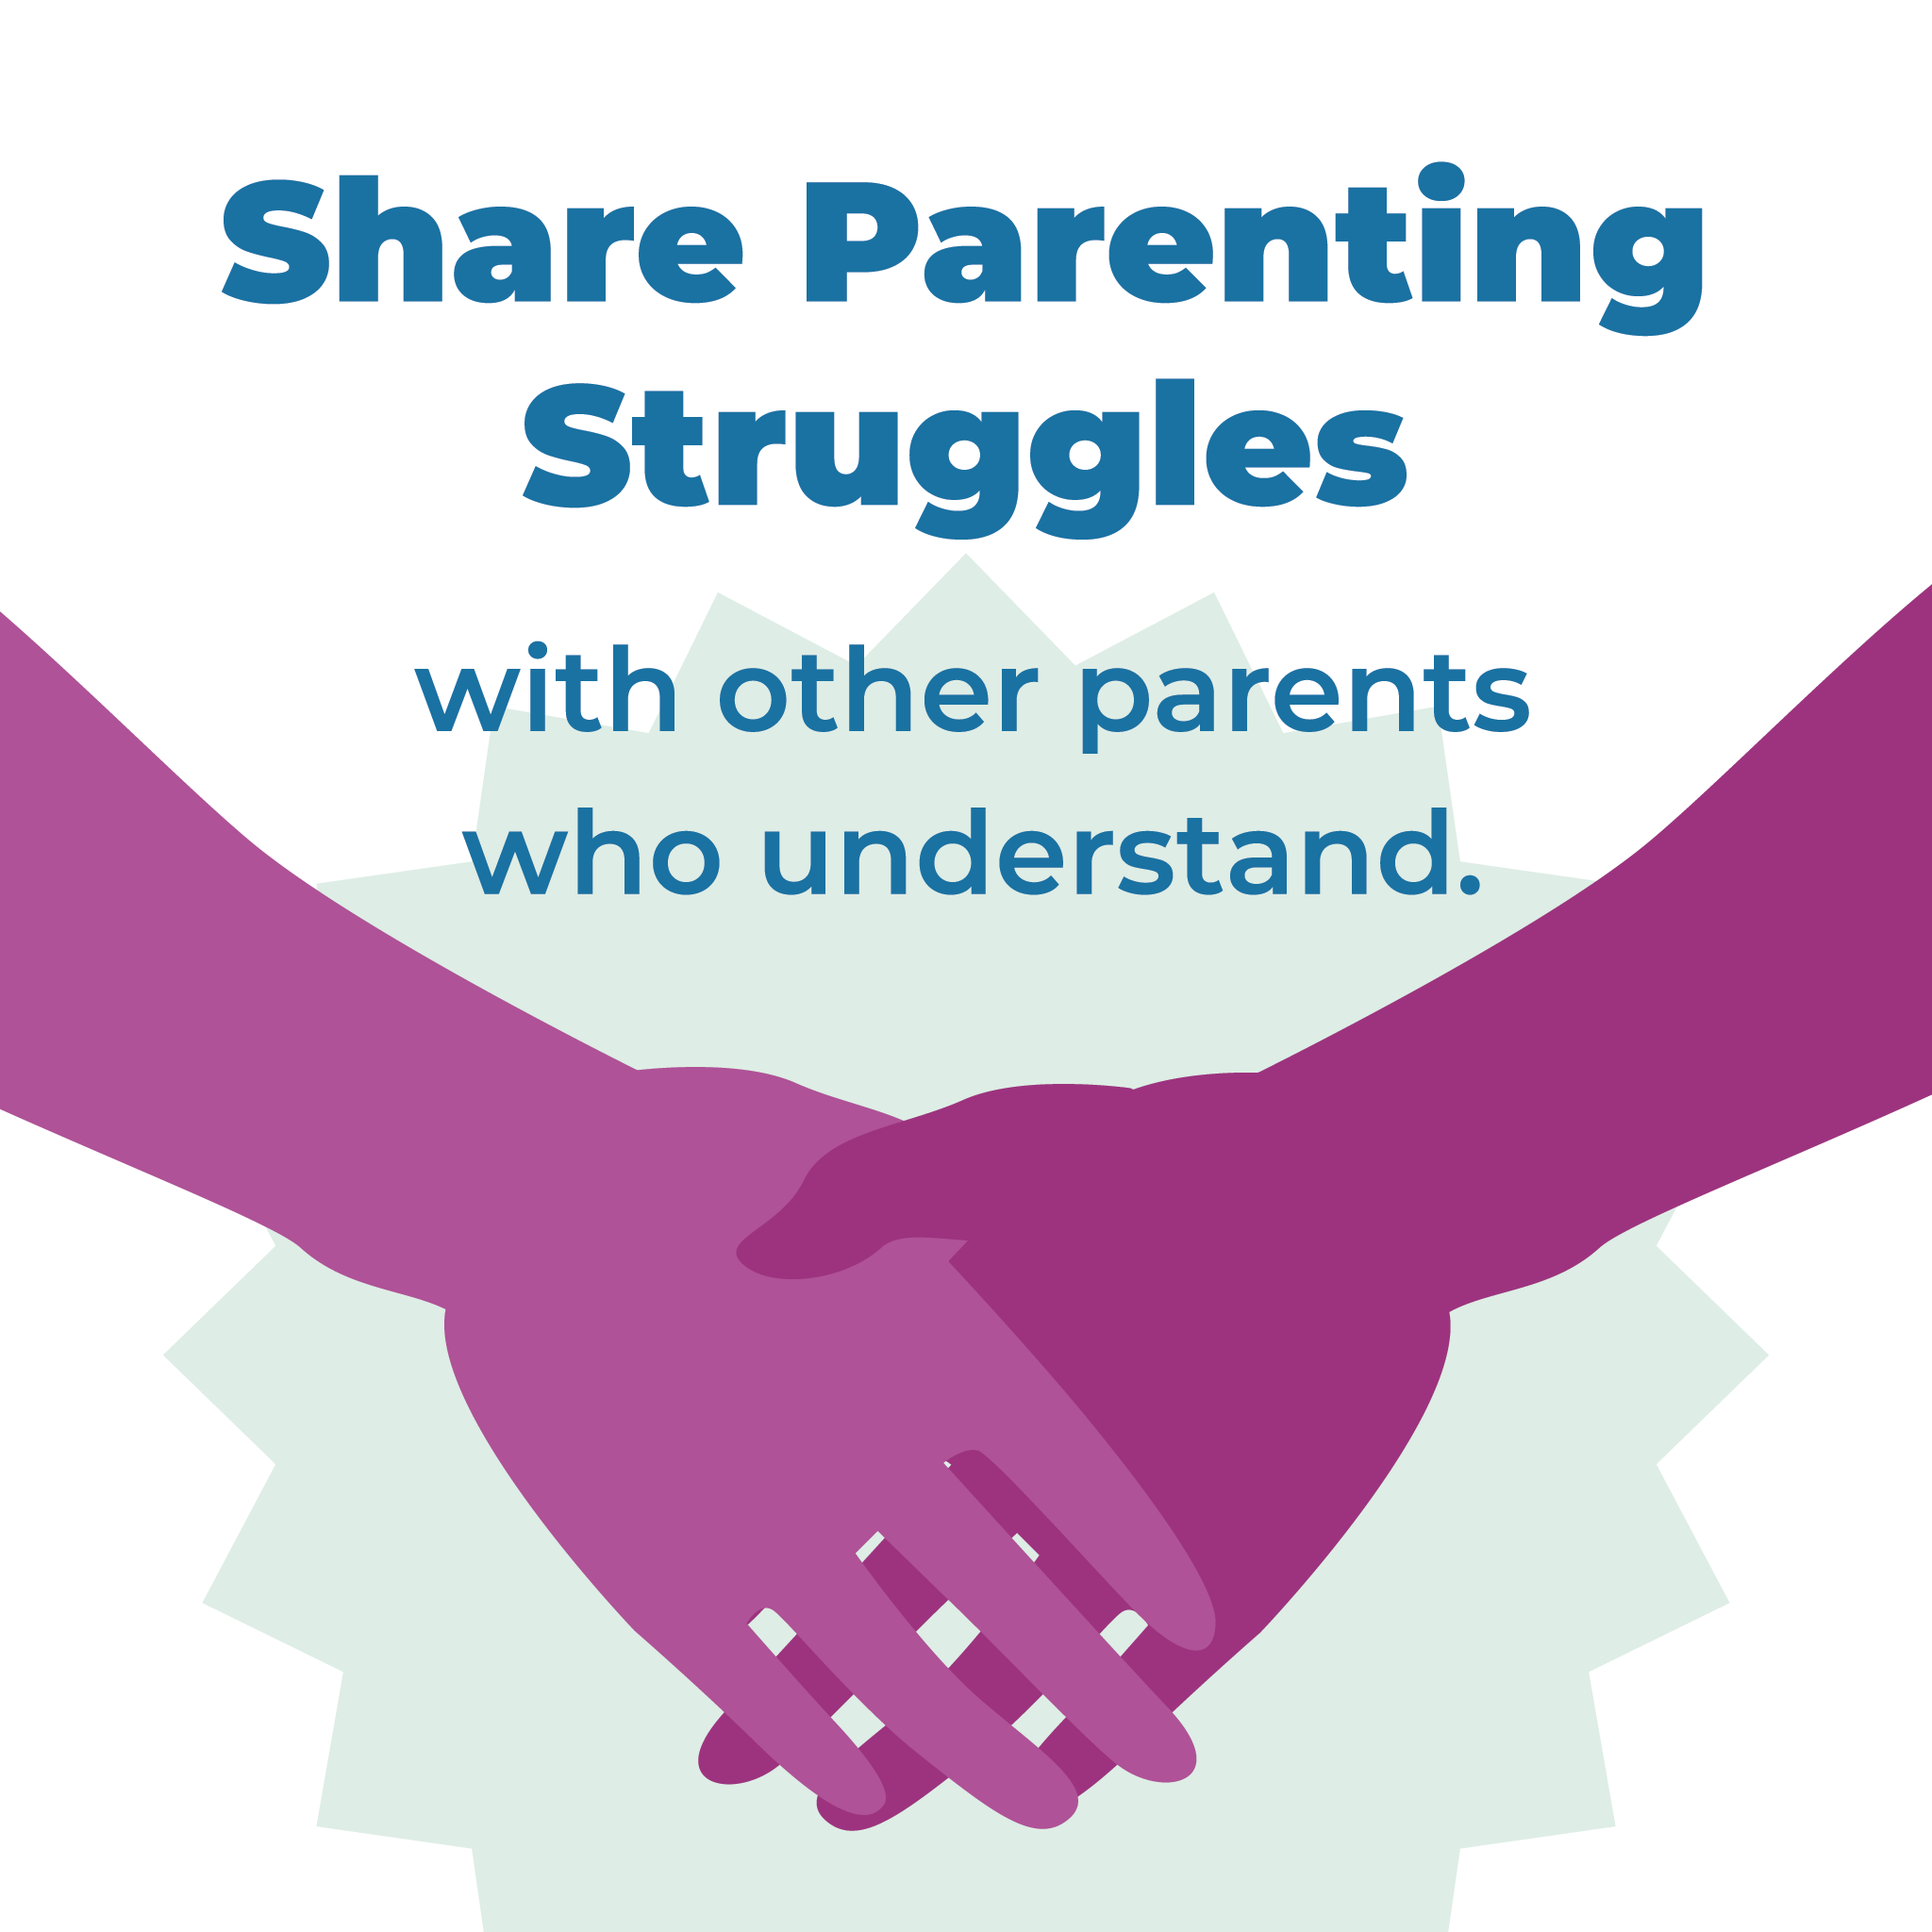 Share parenting struggles with other parents who understand.